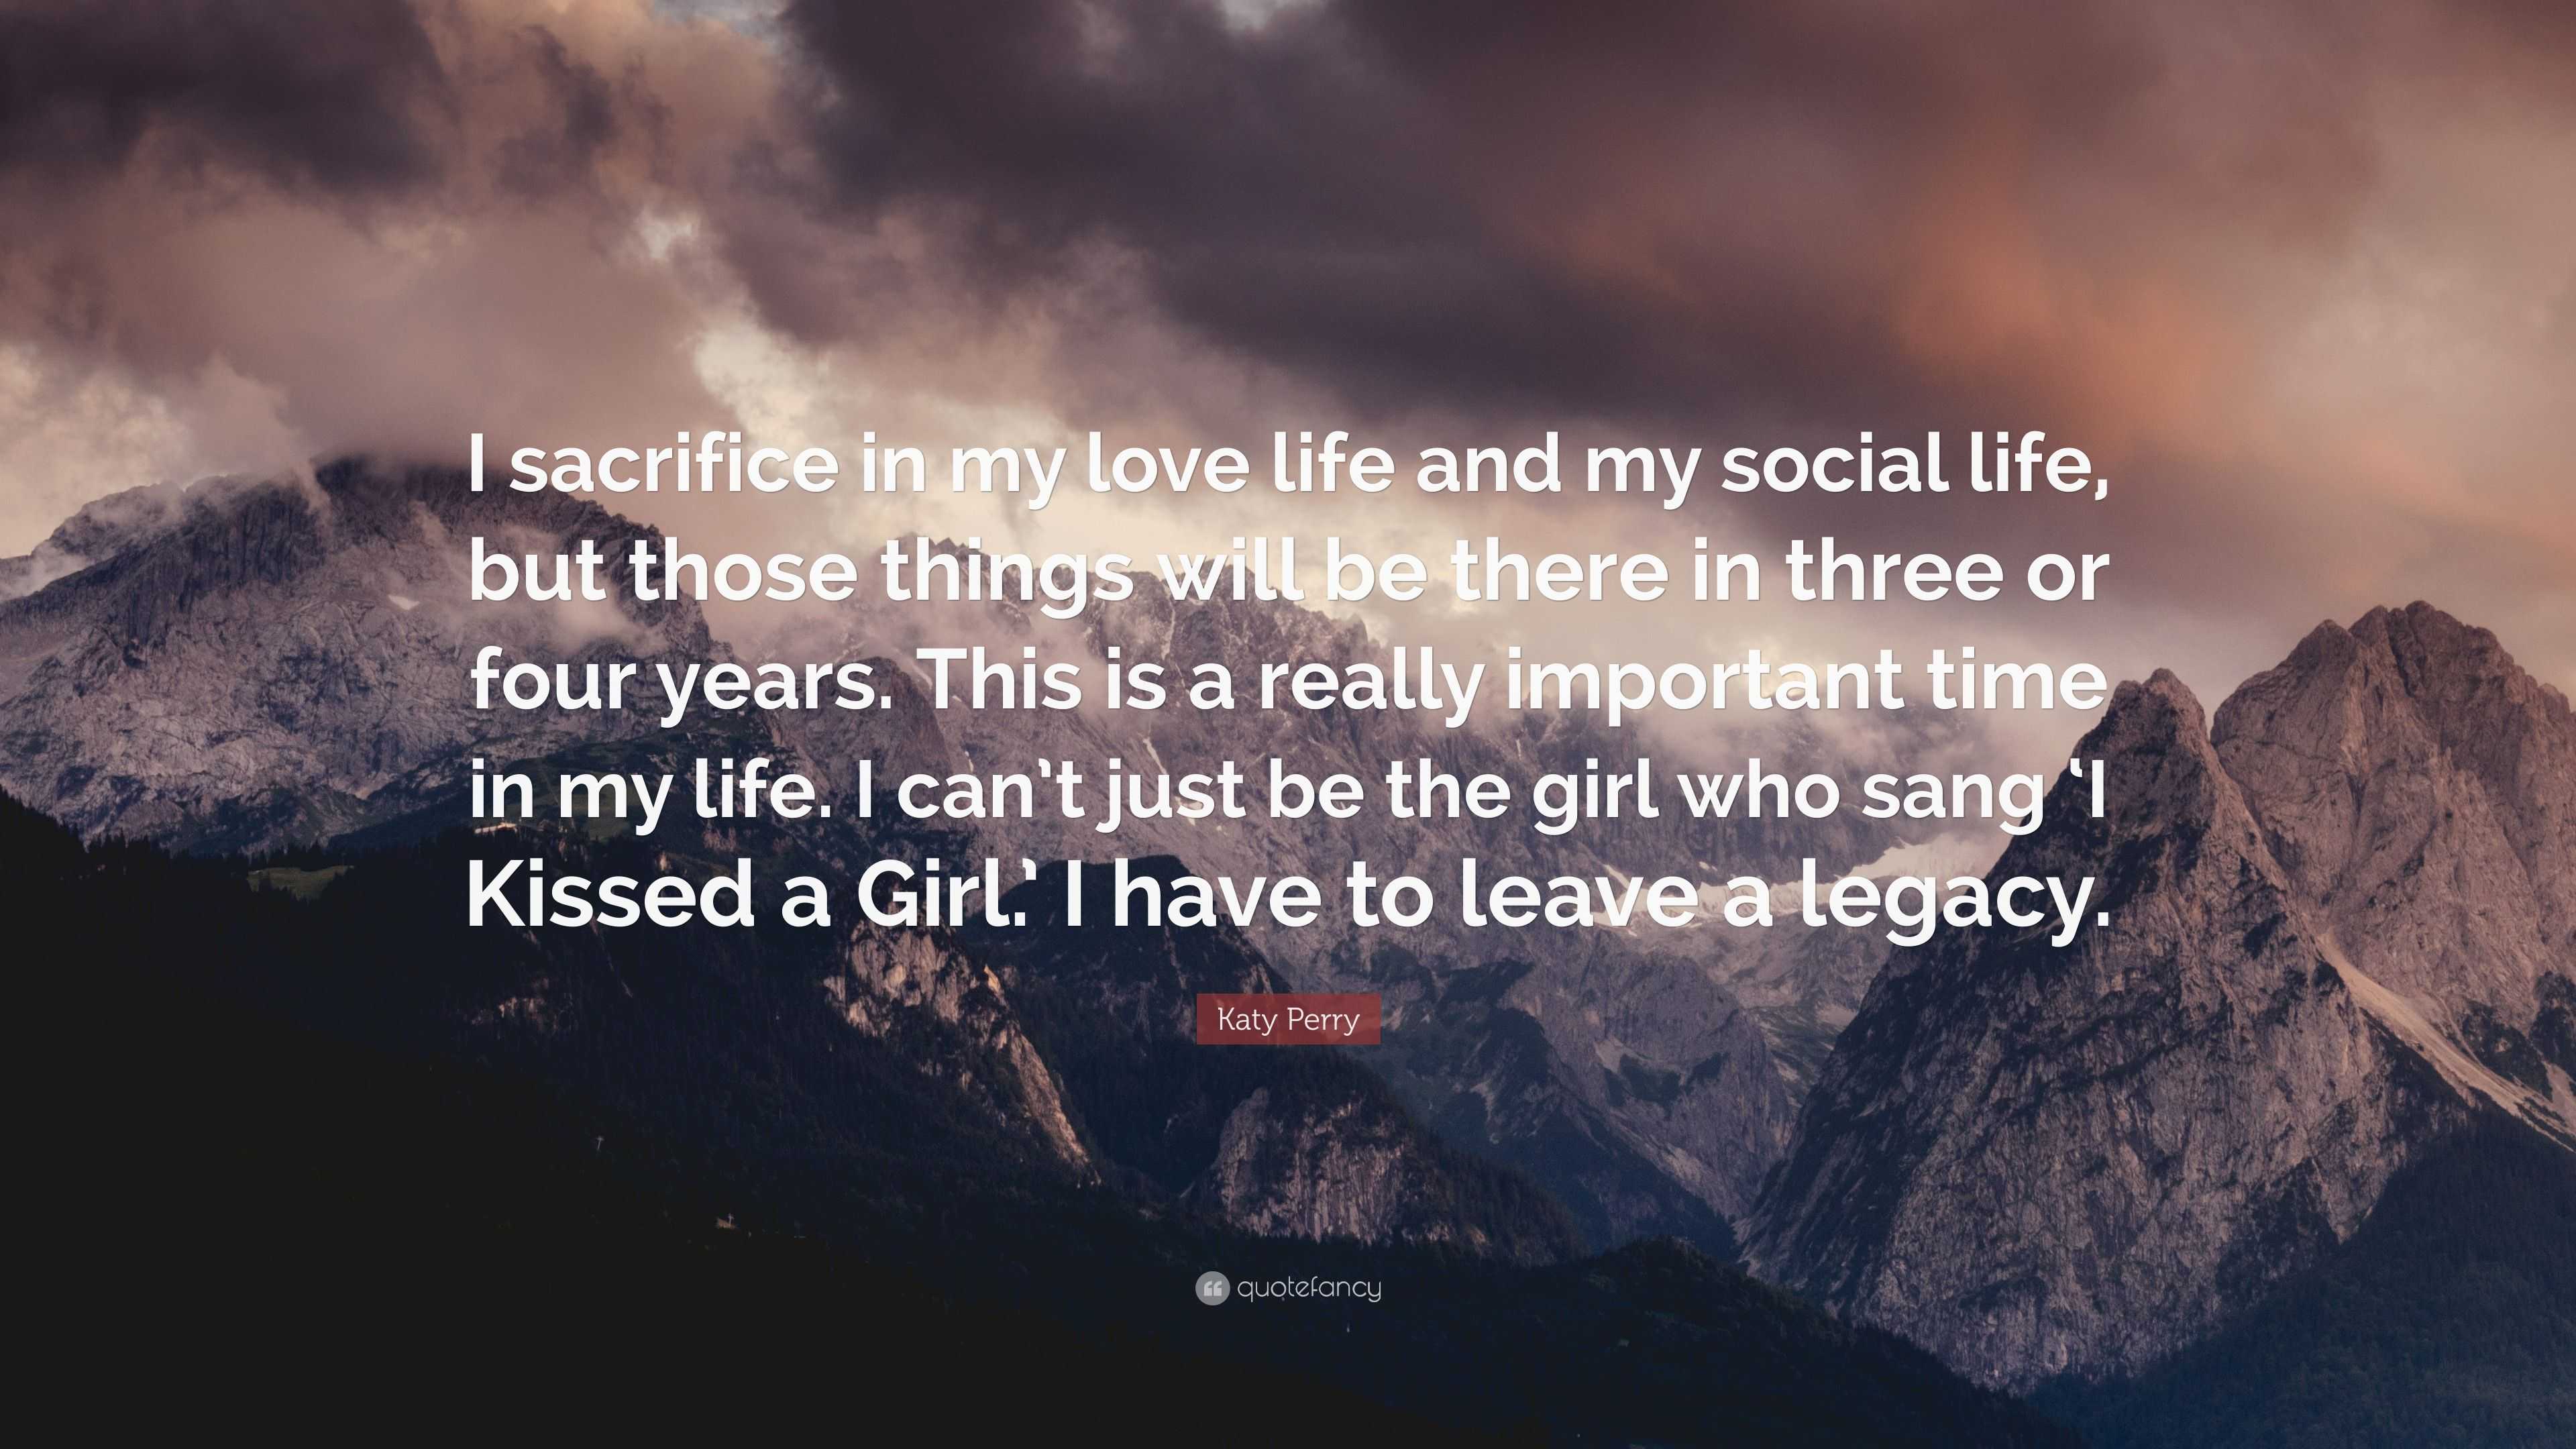 Katy Perry Quote: "I sacrifice in my love life and my social life, but those things will be ...